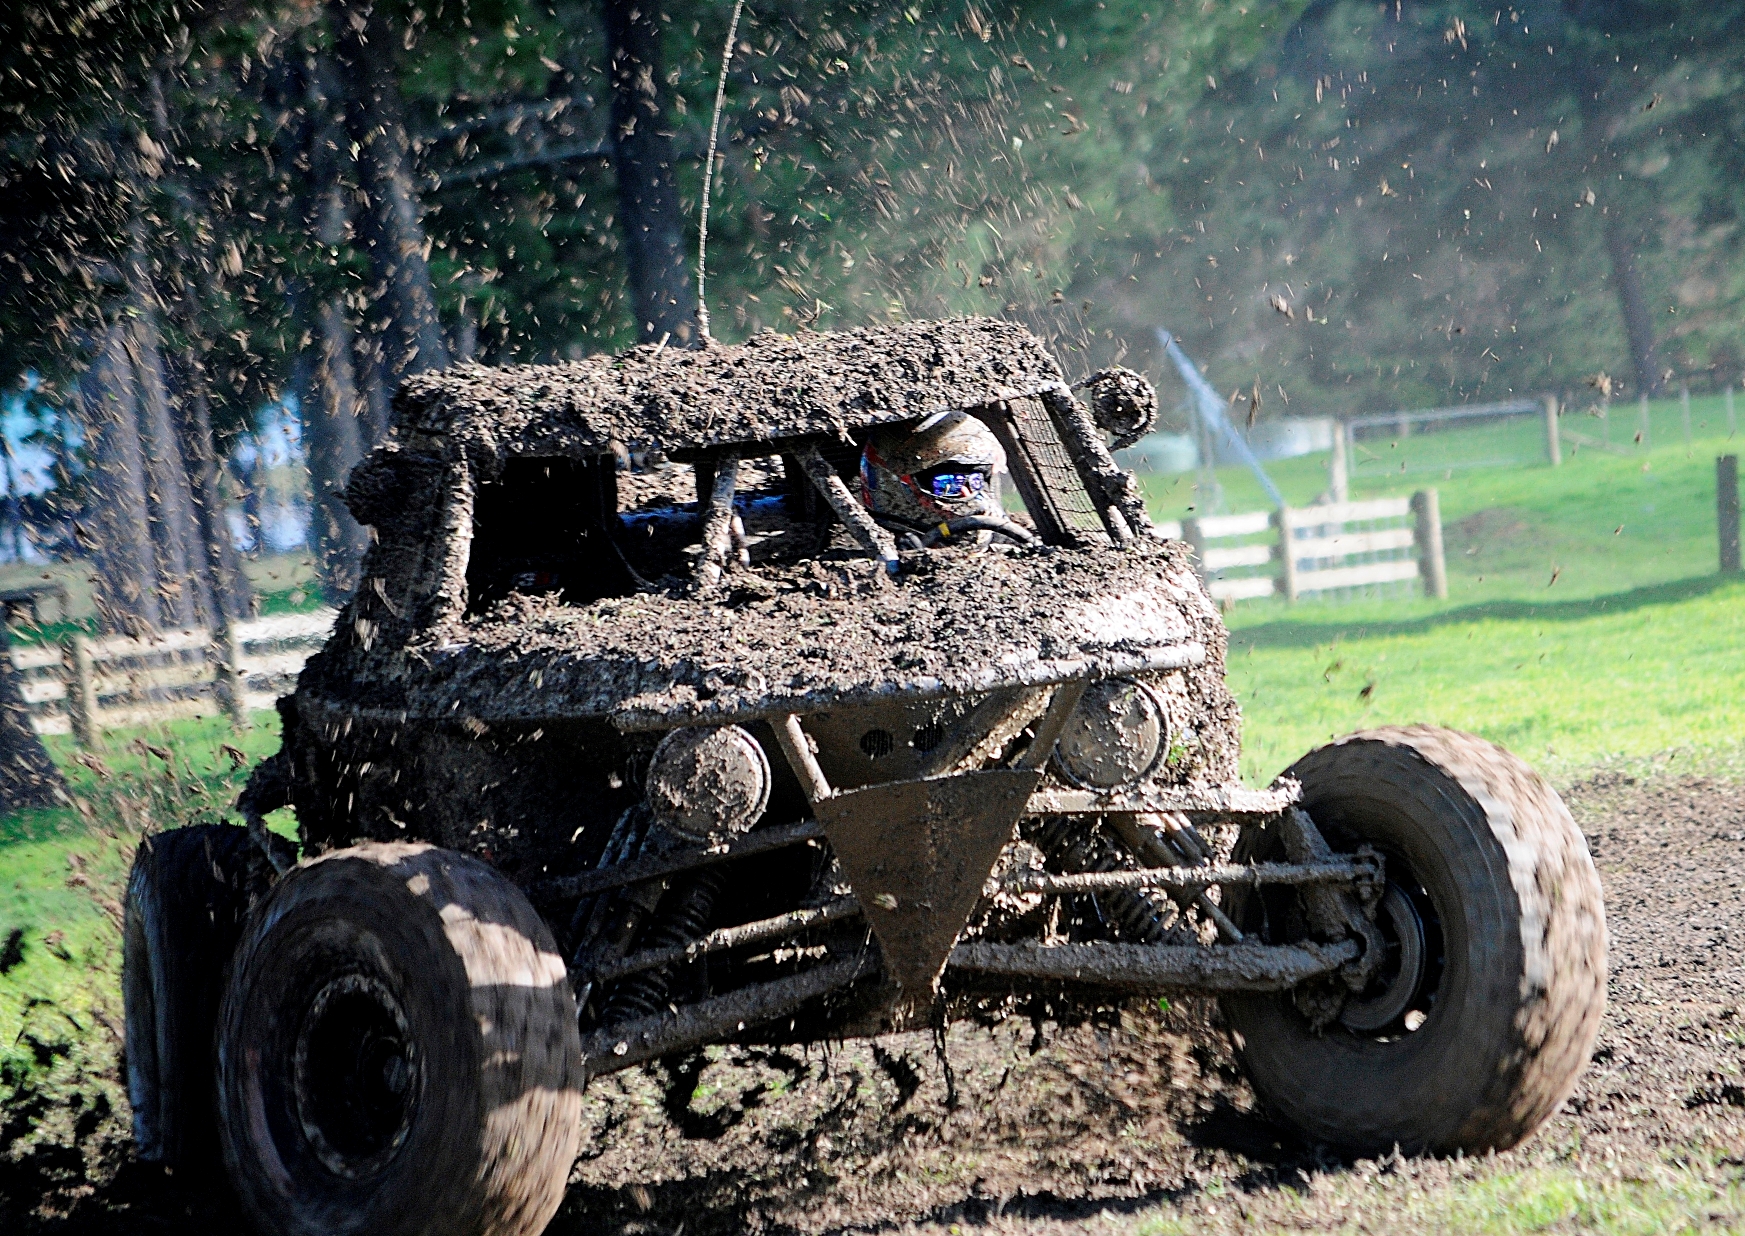 Taupo 1000 off road race attracts record entry